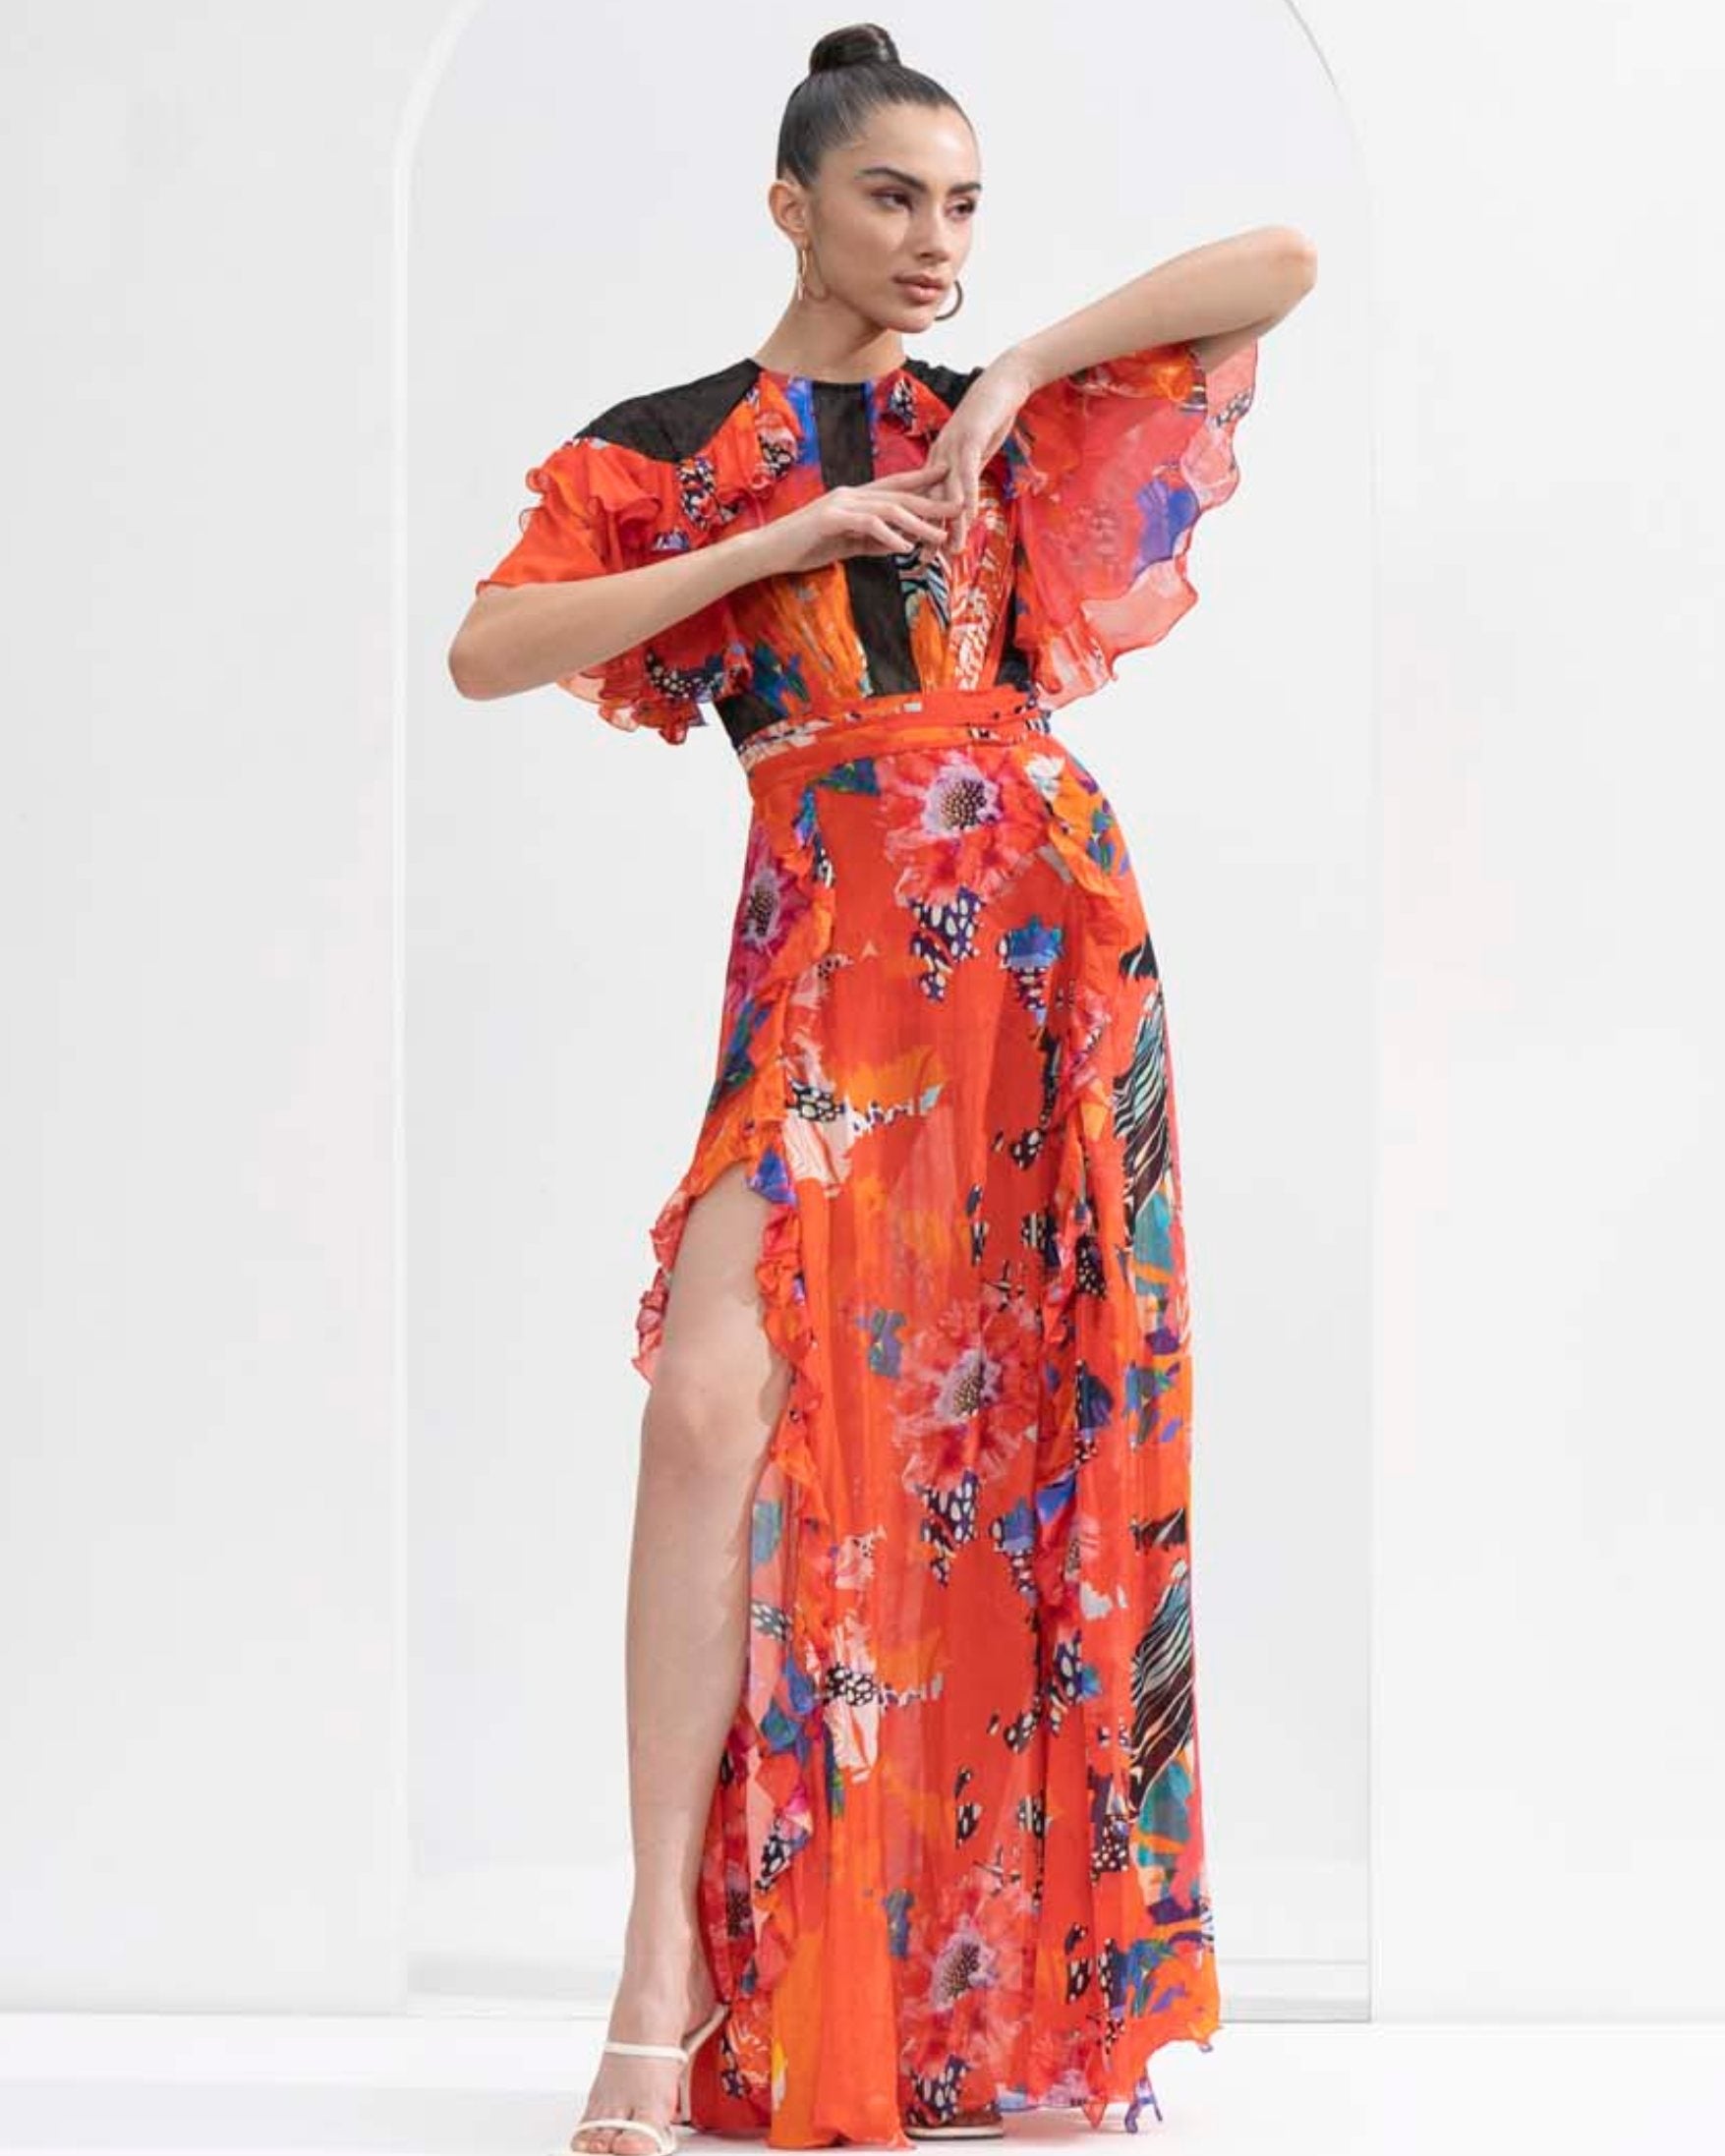 Red garden printed chiffon dress with a slit on both sides and Chantley detailing on the bodice.